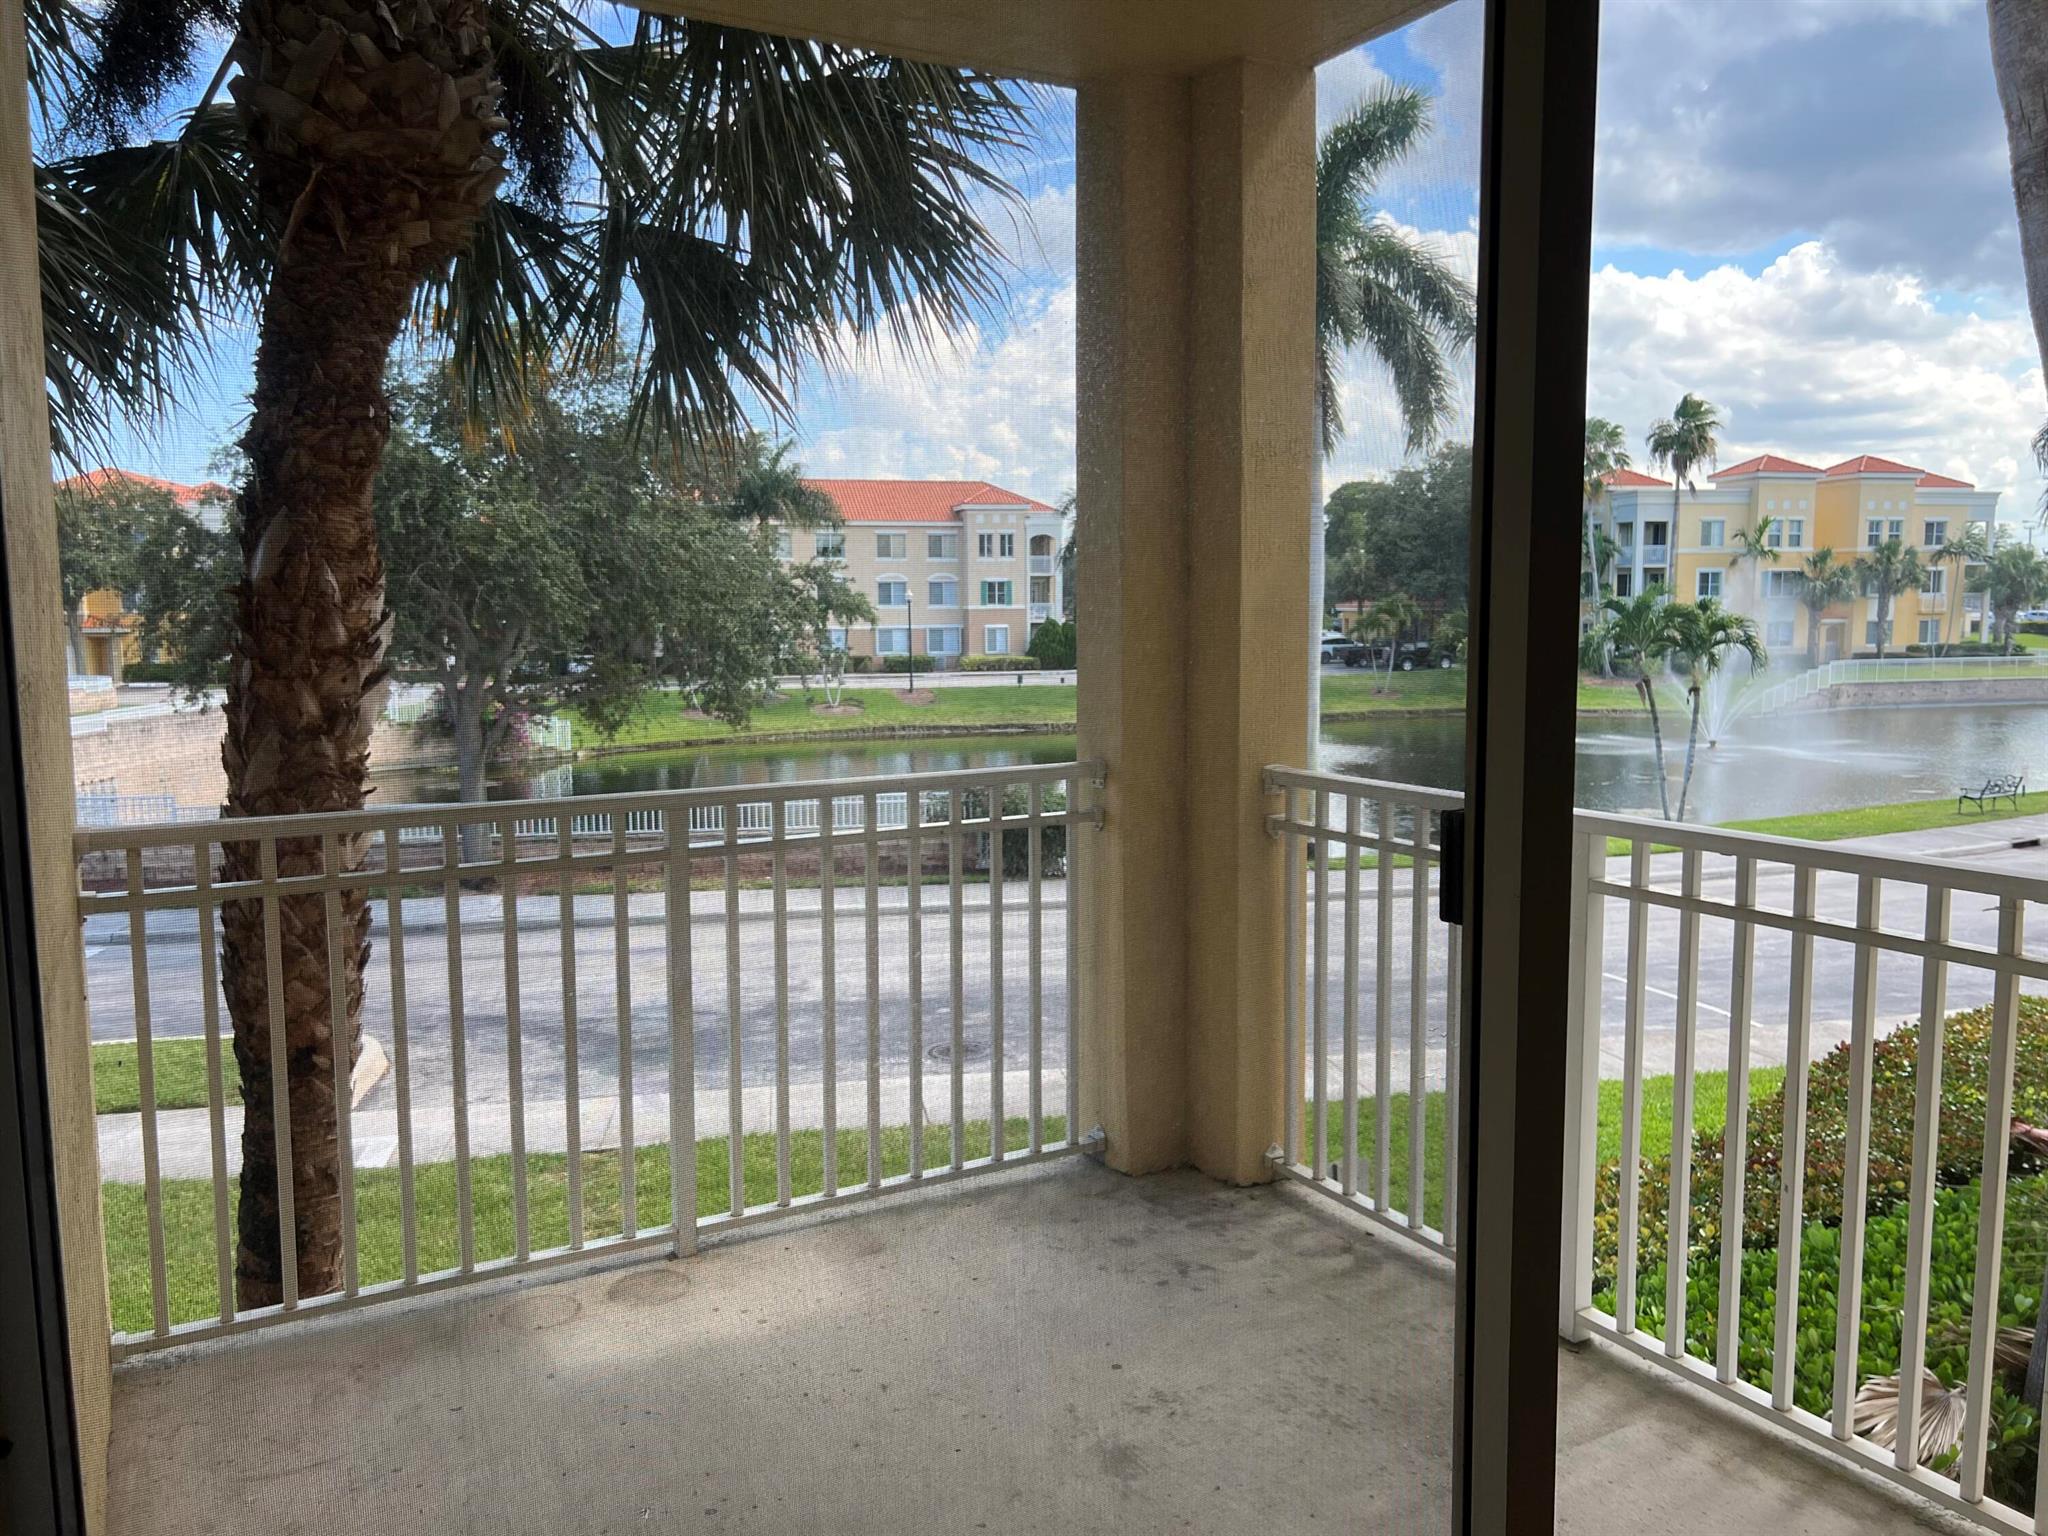 Second floor 3 bedroom 2 bathroom unit in best location in Palm Beach Gardens. Gated community with all amenities. Walk to shopping, restaurants, downtown Palm Beach Gardens with movie theater, Whole Foods etc. Conveniently located just off I-95 exit that makes it possible to get to Downtown West Palm Beach, the outlet mall and the PBI airport in just a few minutes. Walking distance to Gardens Mall and Palm Beach State College.